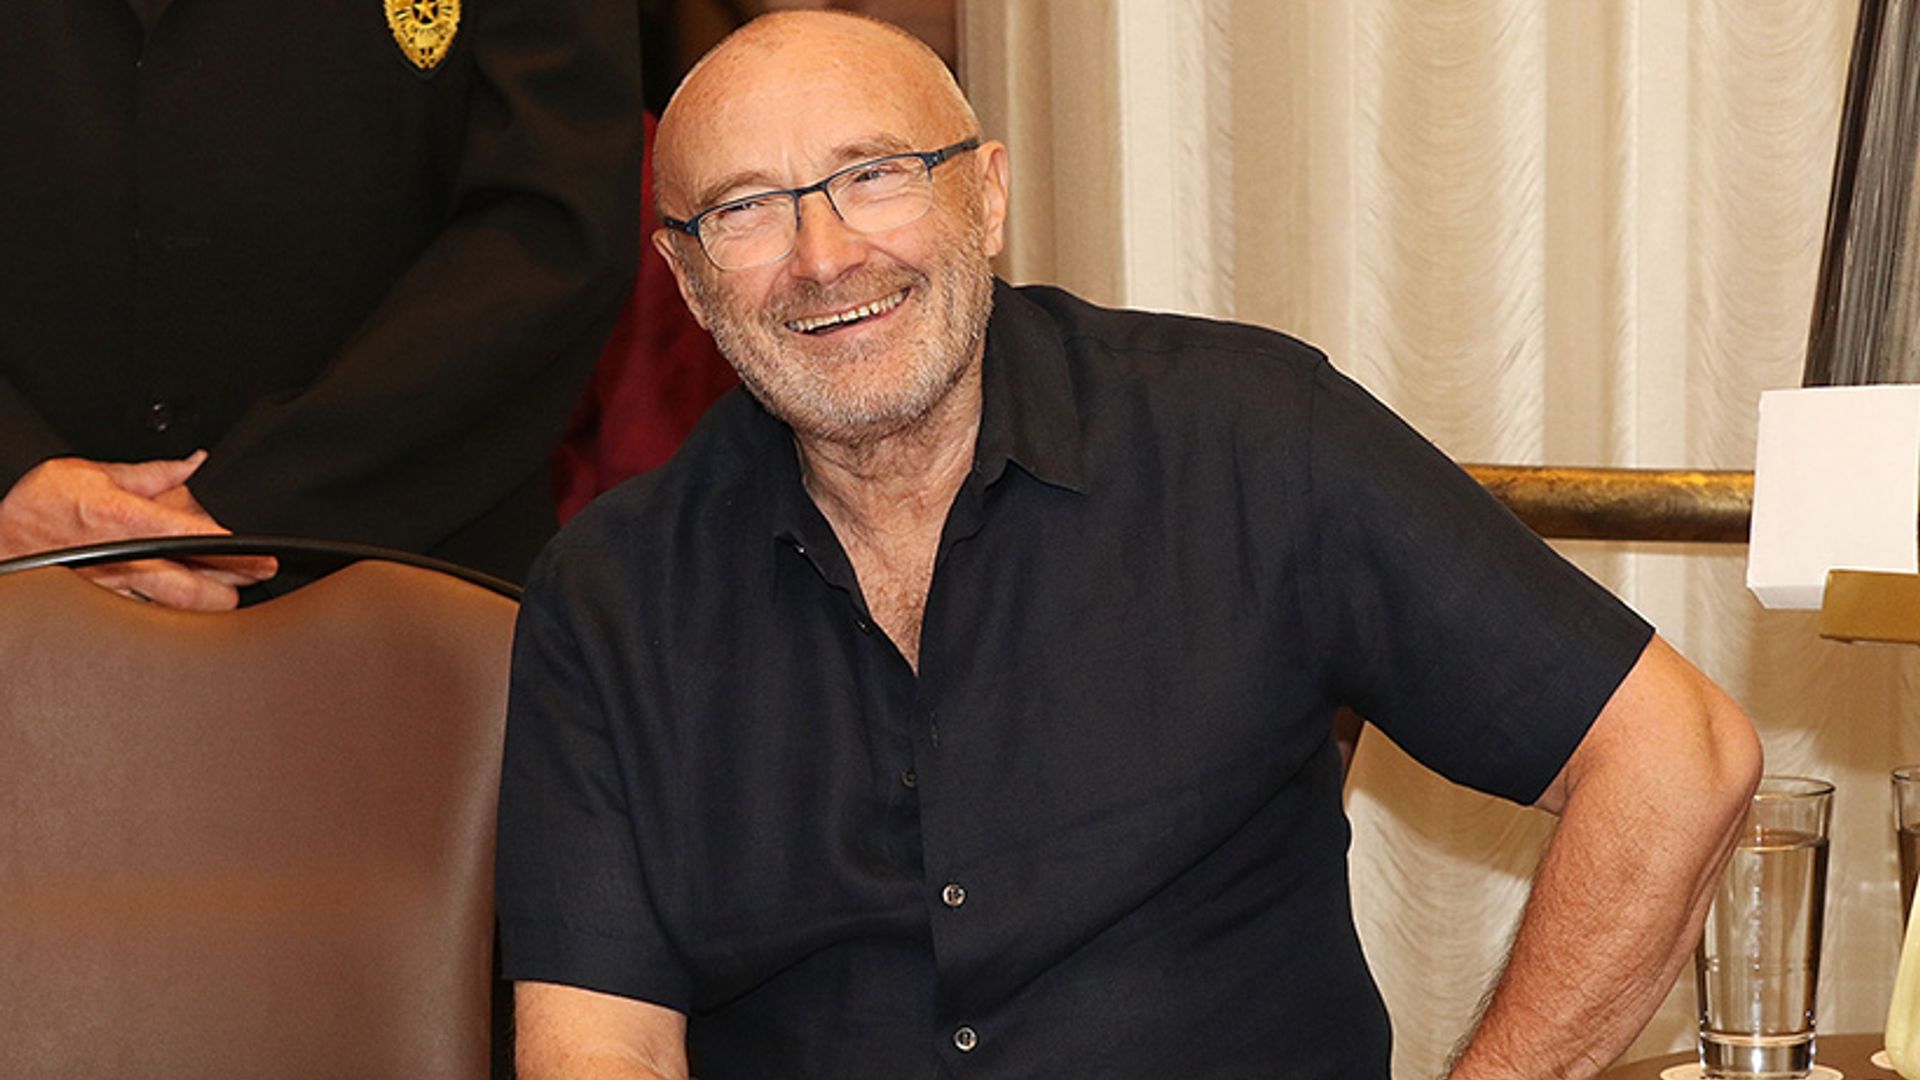 Phil Collins rushed to hospital after fall in his hotel room